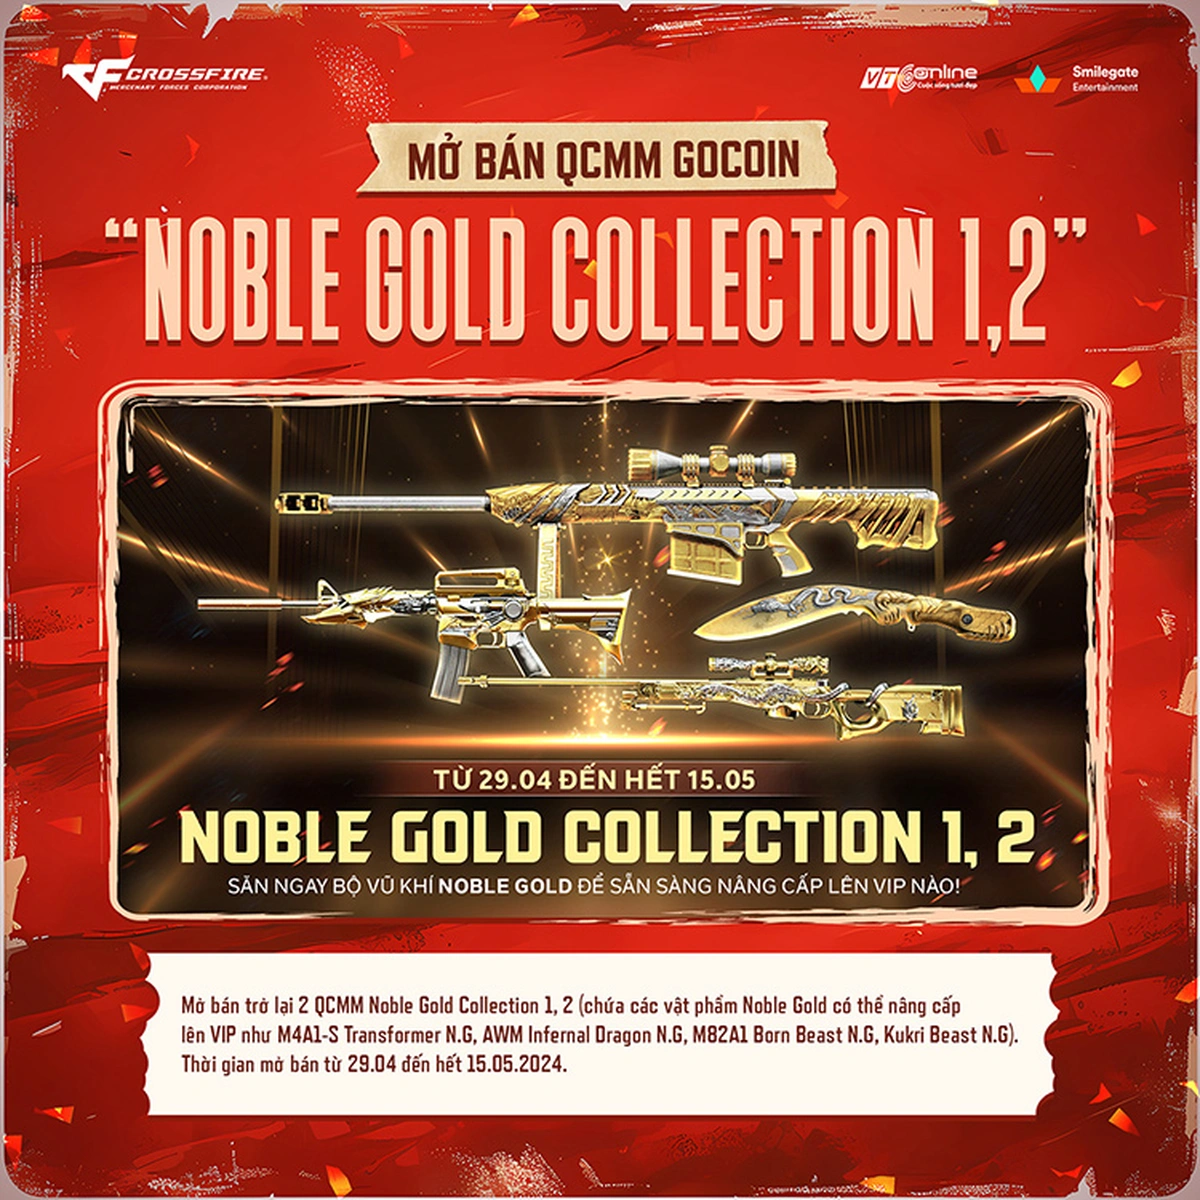 QCMM Noble Gold Collection 1 & 2